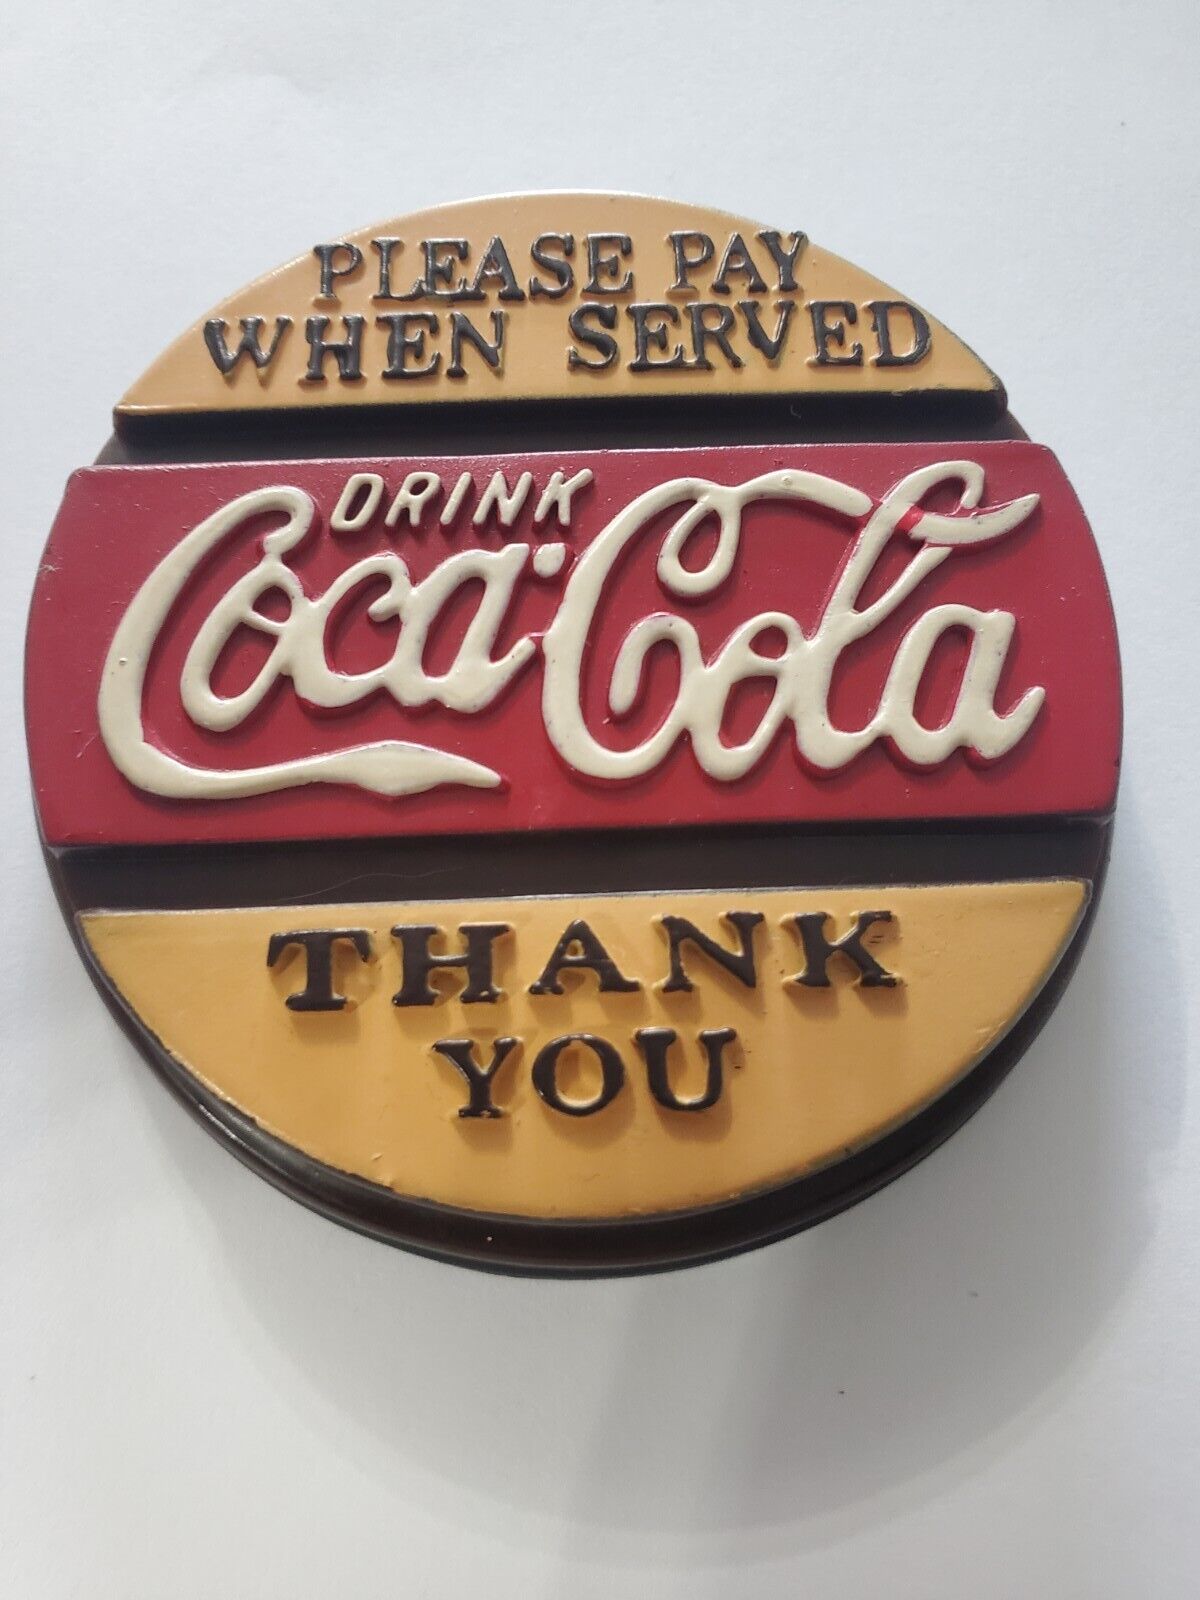 VINTAGE FRIDGE MAGNET DRINK COCA-COLA, PLEASE PAY WHEN SERVED, THANK YOU 